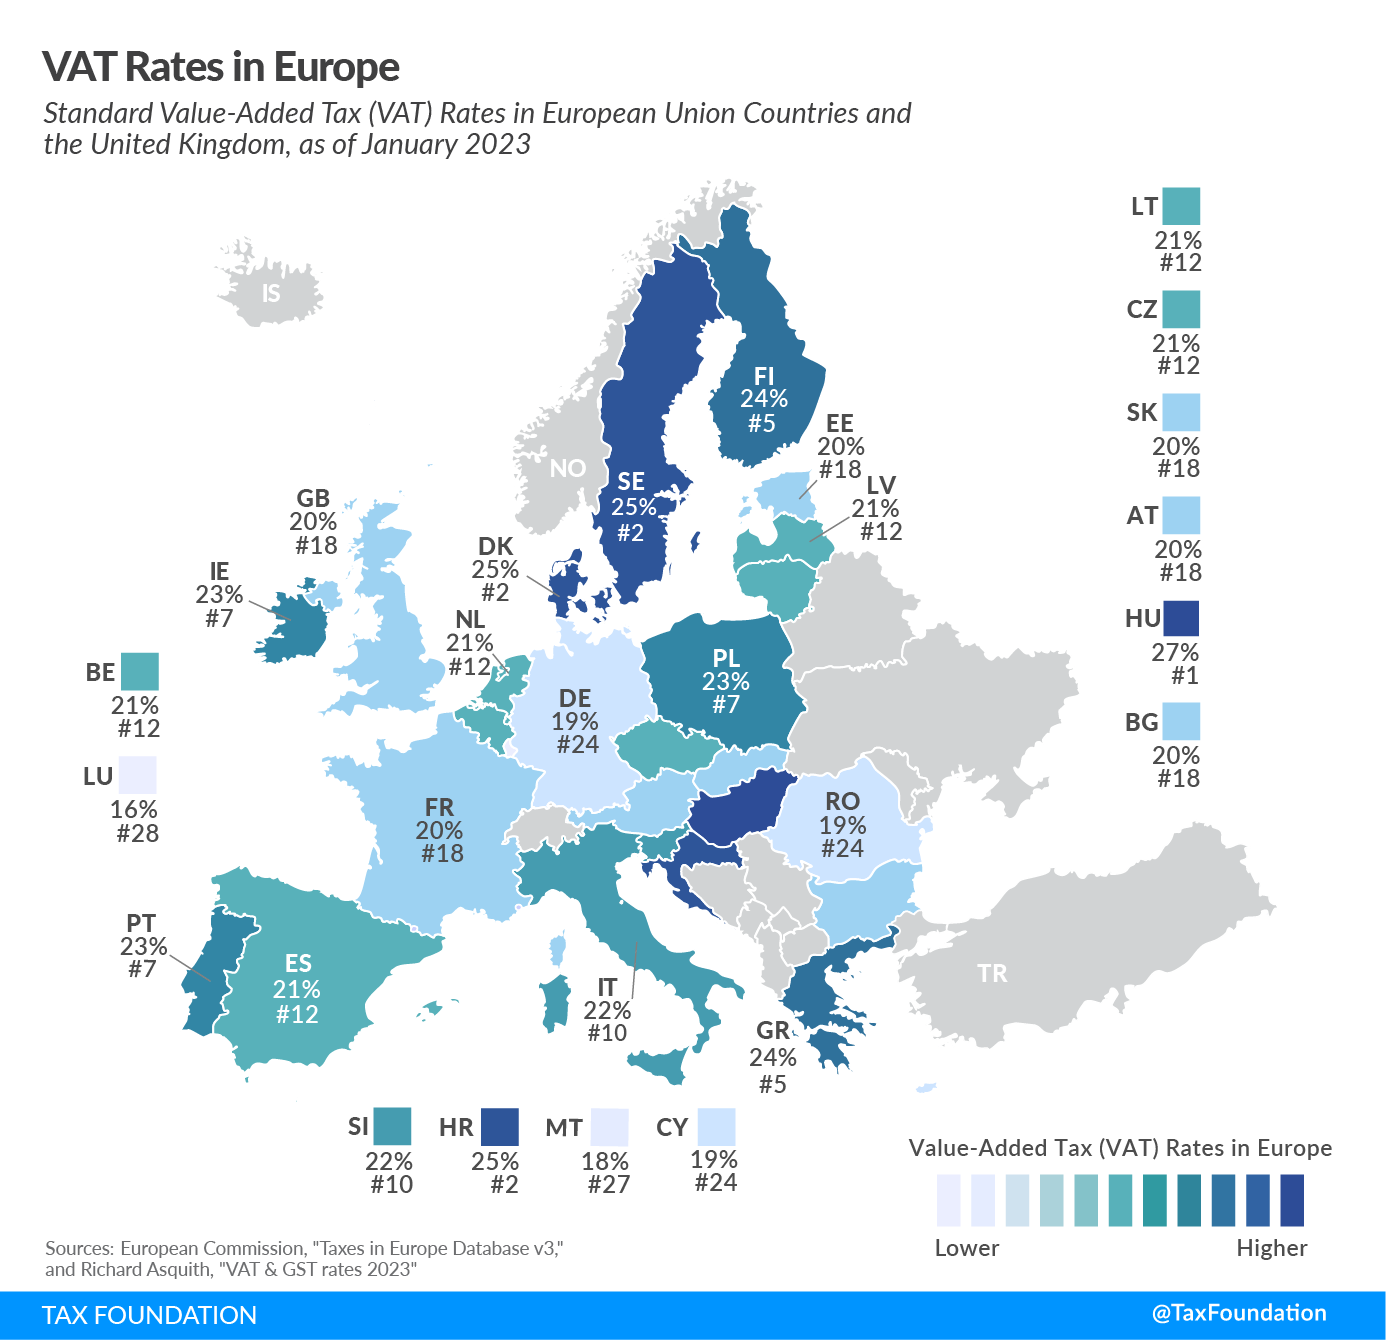 2023 VAT rates in Europe, 2023 VAT rates by country, 2023 value-added tax rates in Europe and 2023 value-added tax rates by country